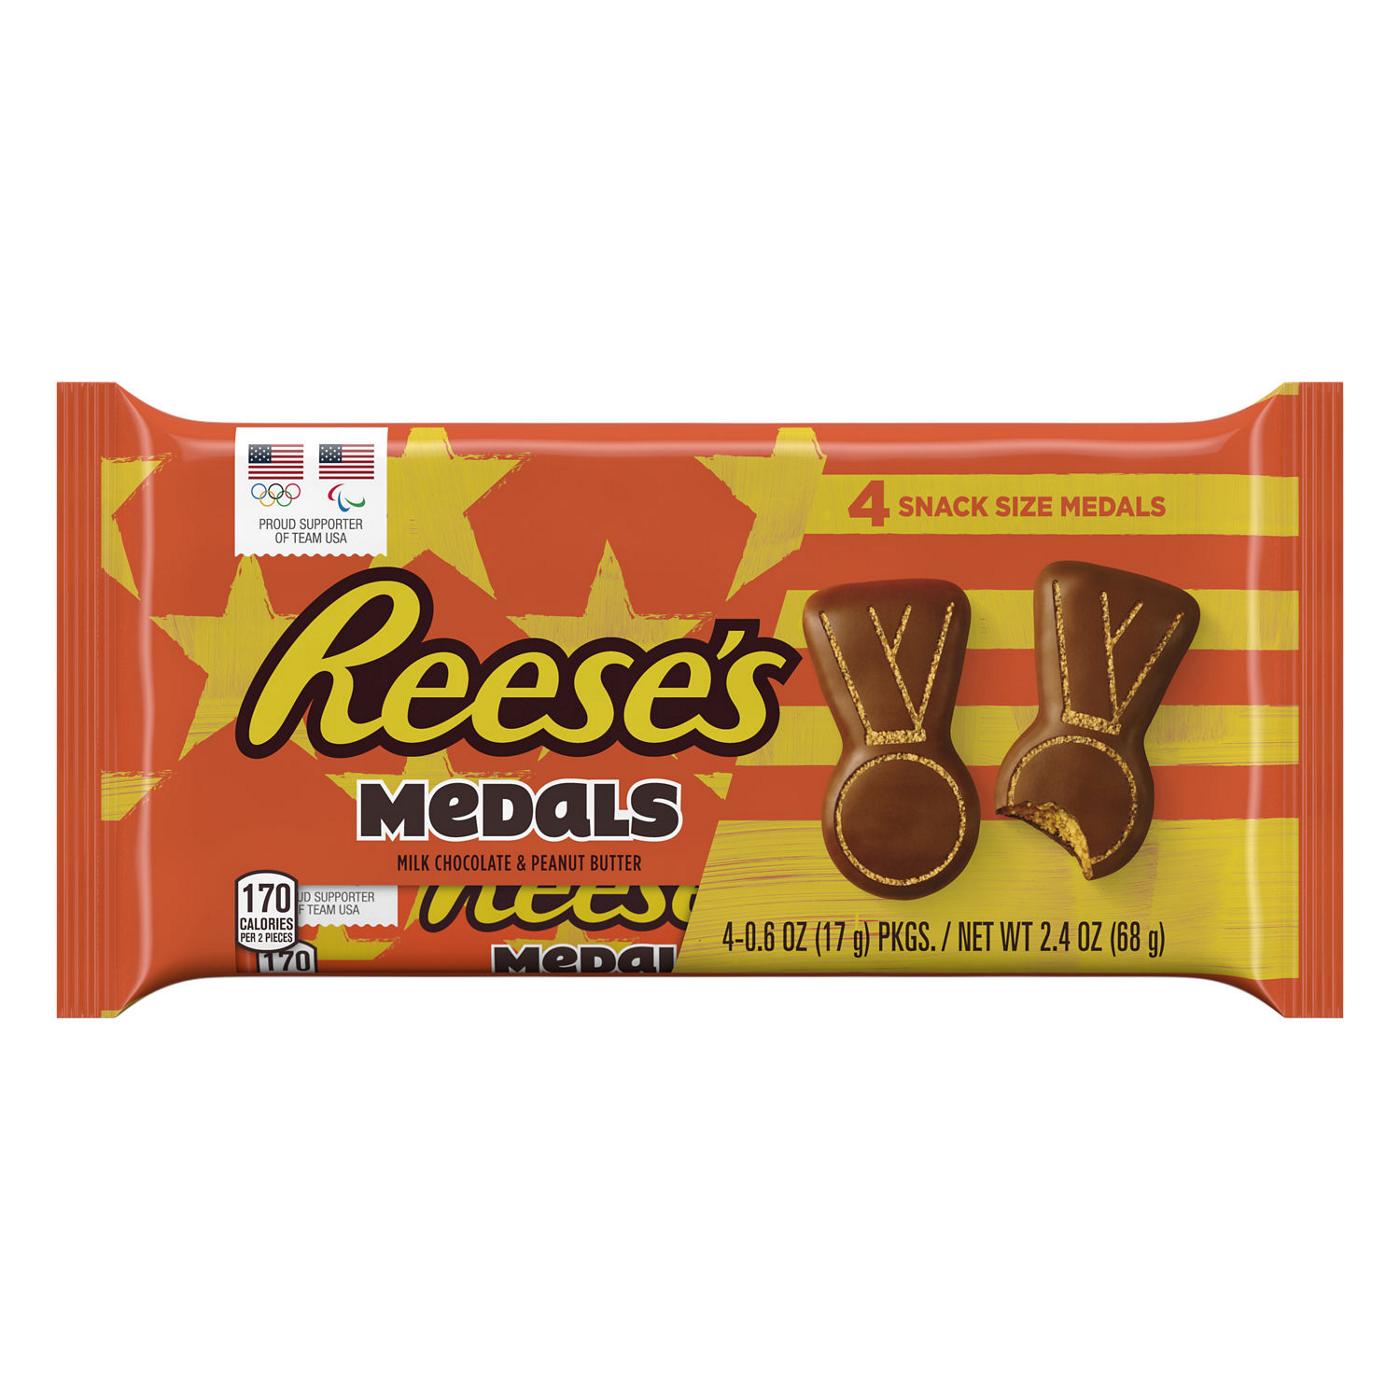 Reese's Medals Peanut Butter Snack Size Candy, 4 pk; image 1 of 2